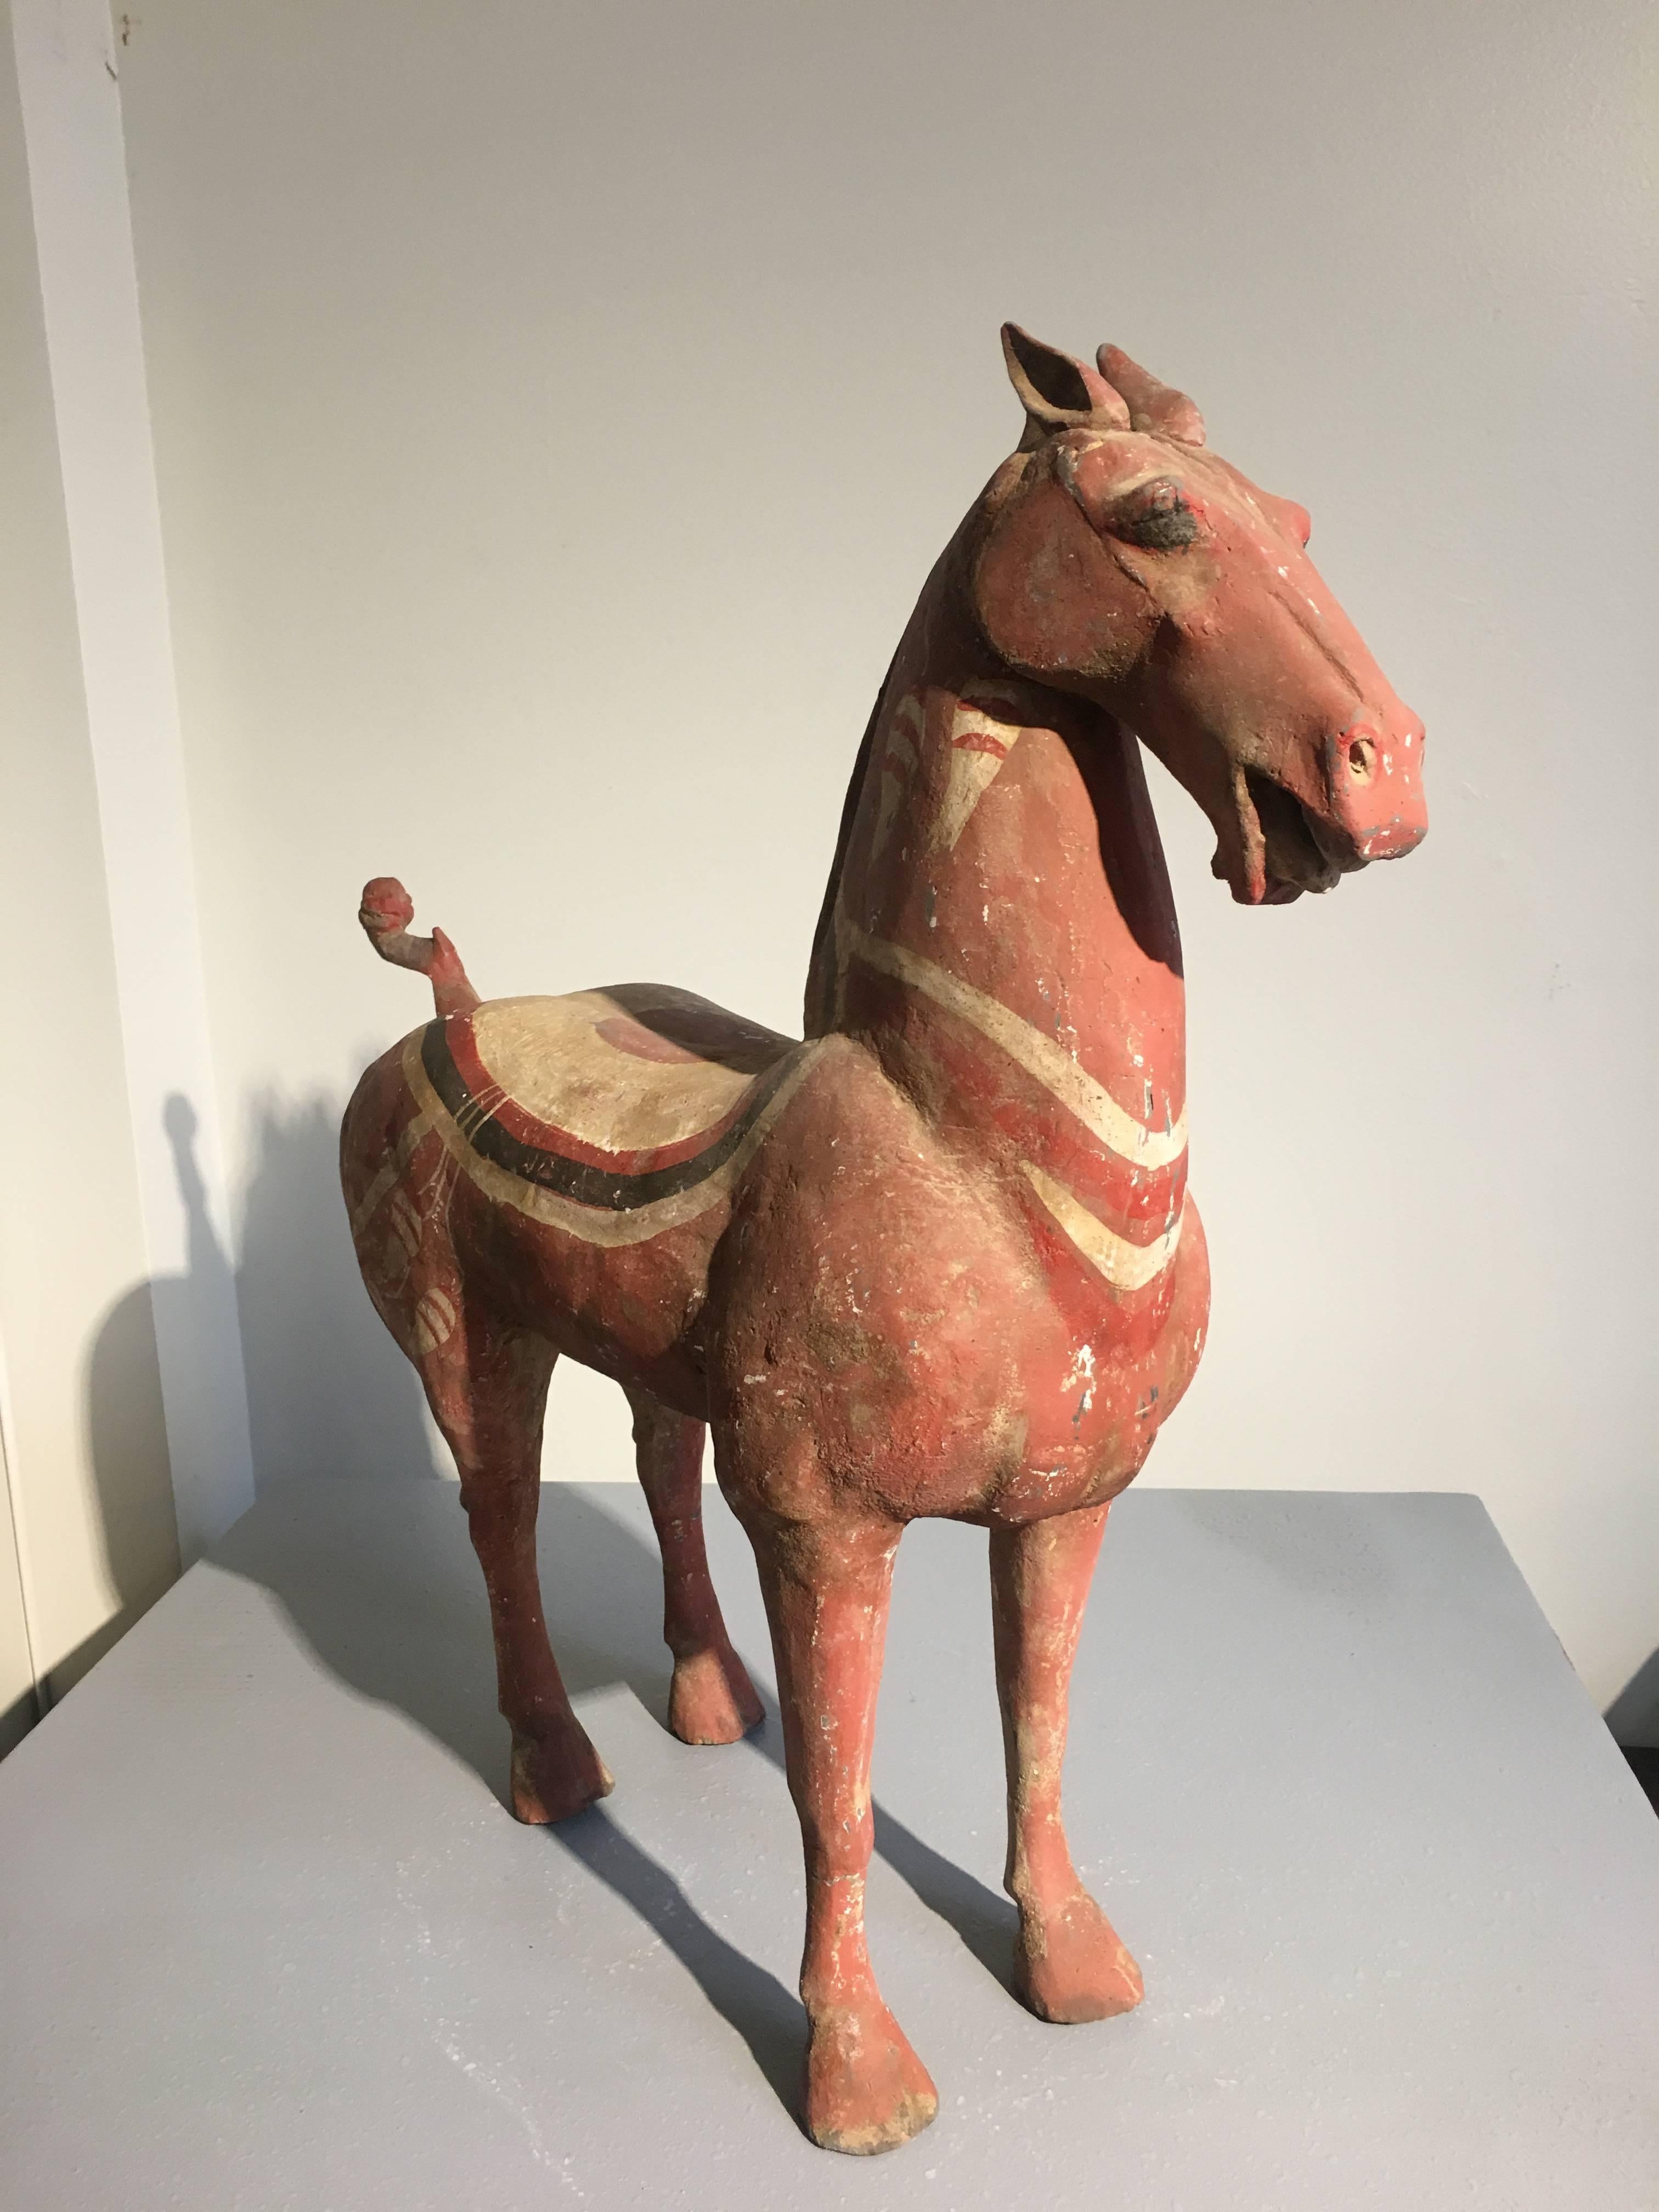 A good Han dynasty high fired gray pottery painted figure of a horse. 
Portrayed standing foursquare on slender legs, with nice musculature throughout, including well rounded haunches and an elegantly shaped neck, with a noble countenance. The